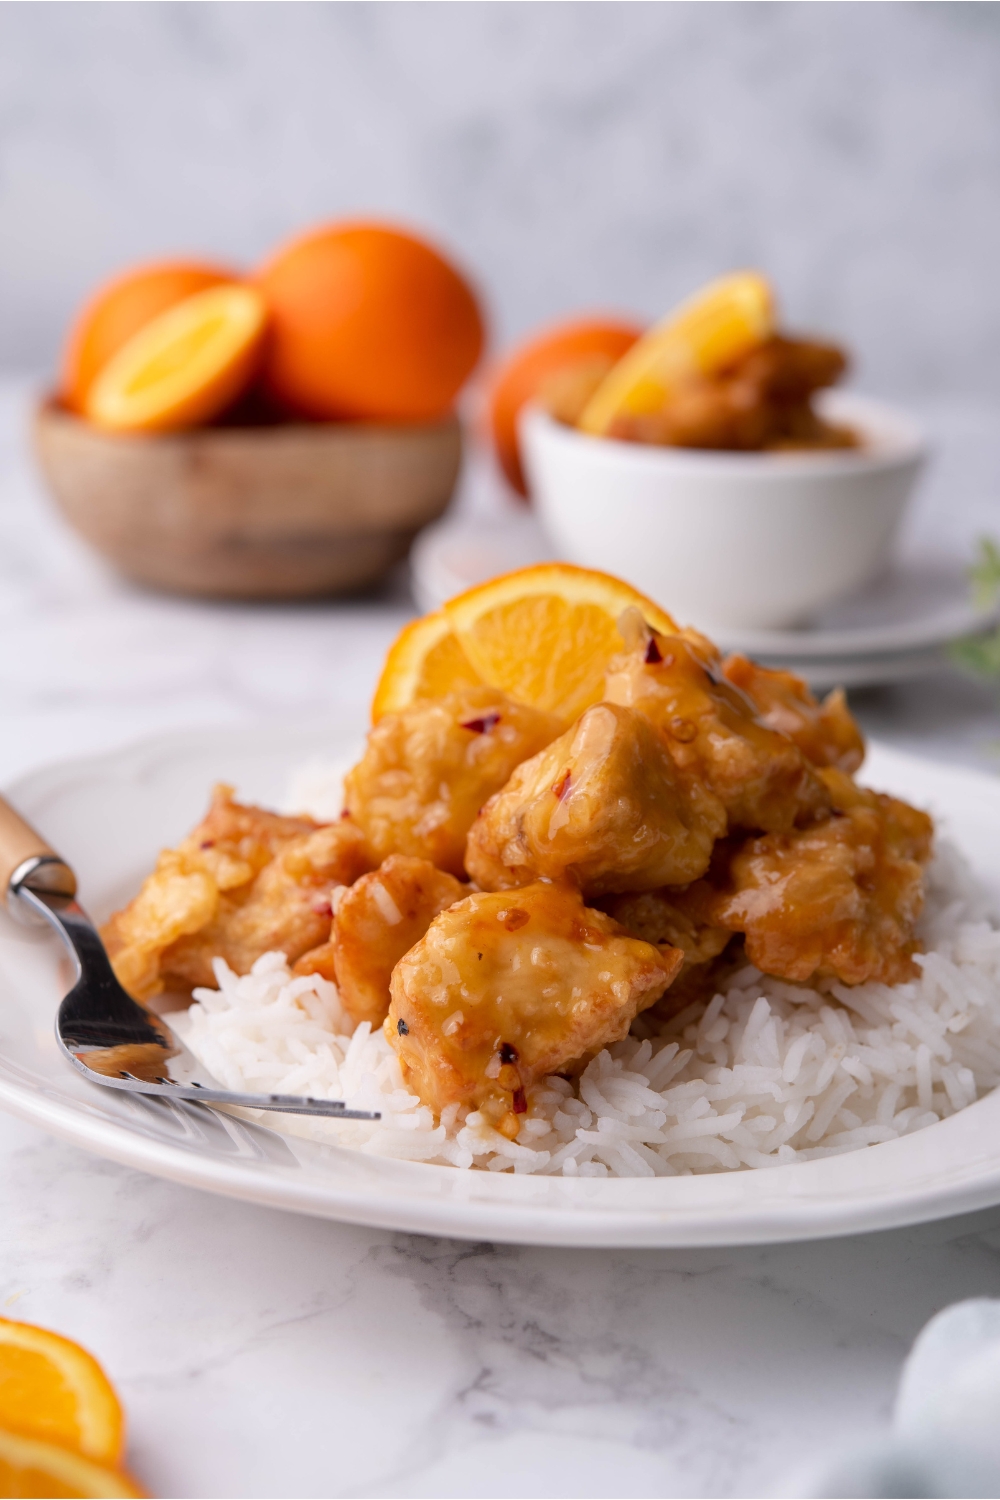 Orange chicken on a bed of white rice on a white plate with an orange slice and a fork on the plate.